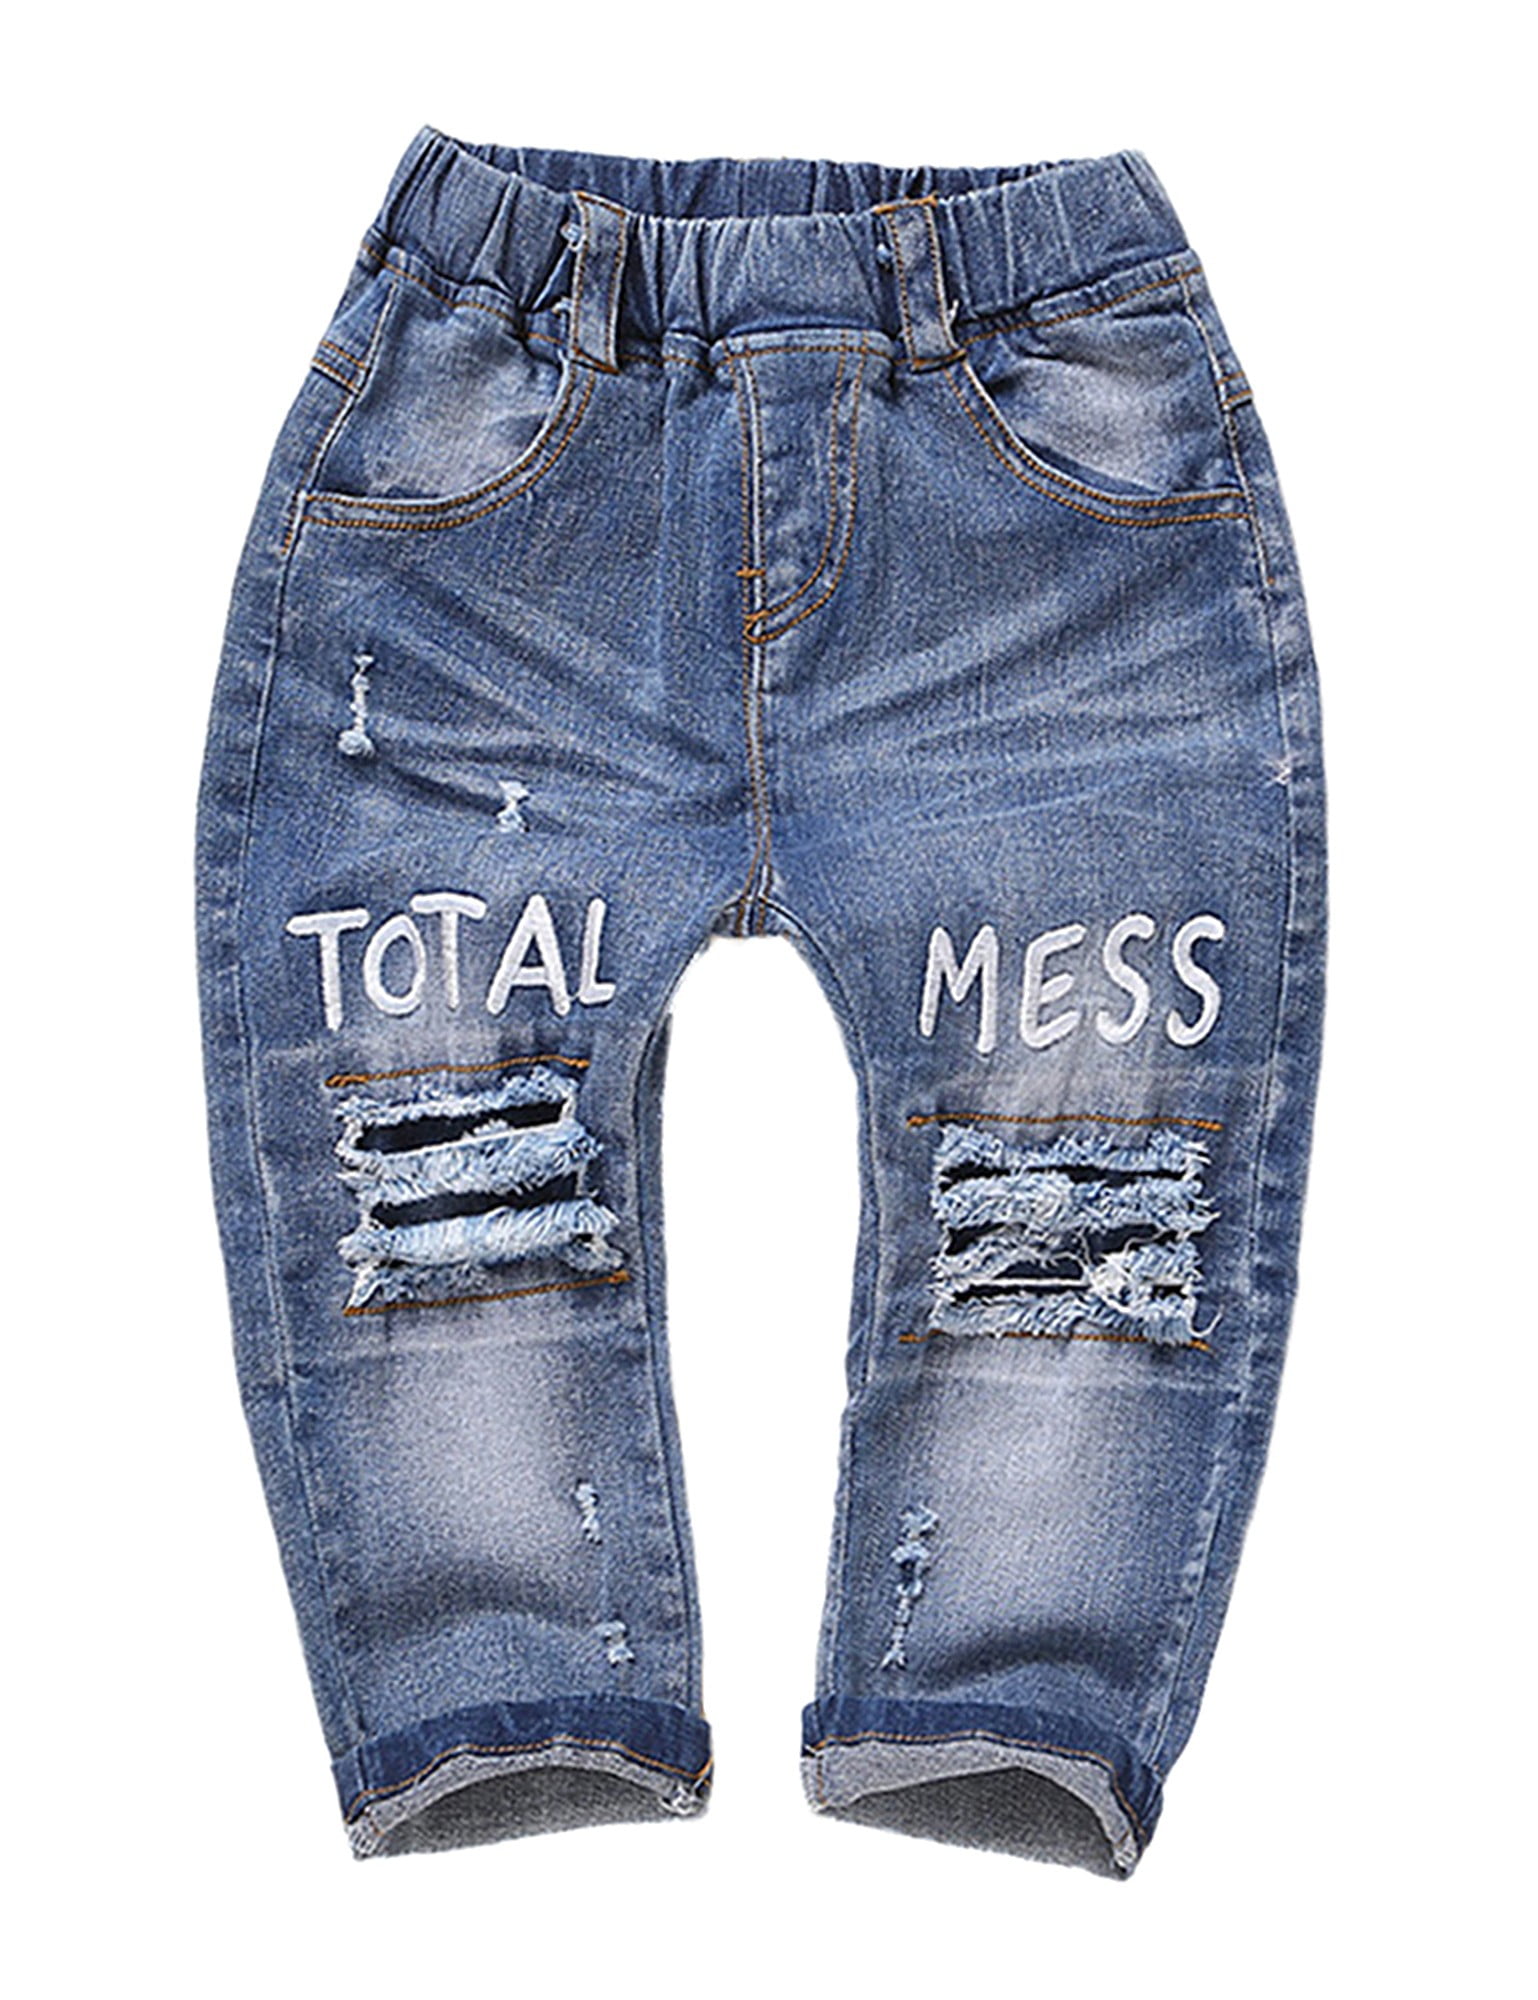 Kidscool Space Baby & Little Girls Ruffled Elastic Waist Colorful Button Decor Vertical Pocket Jeans 